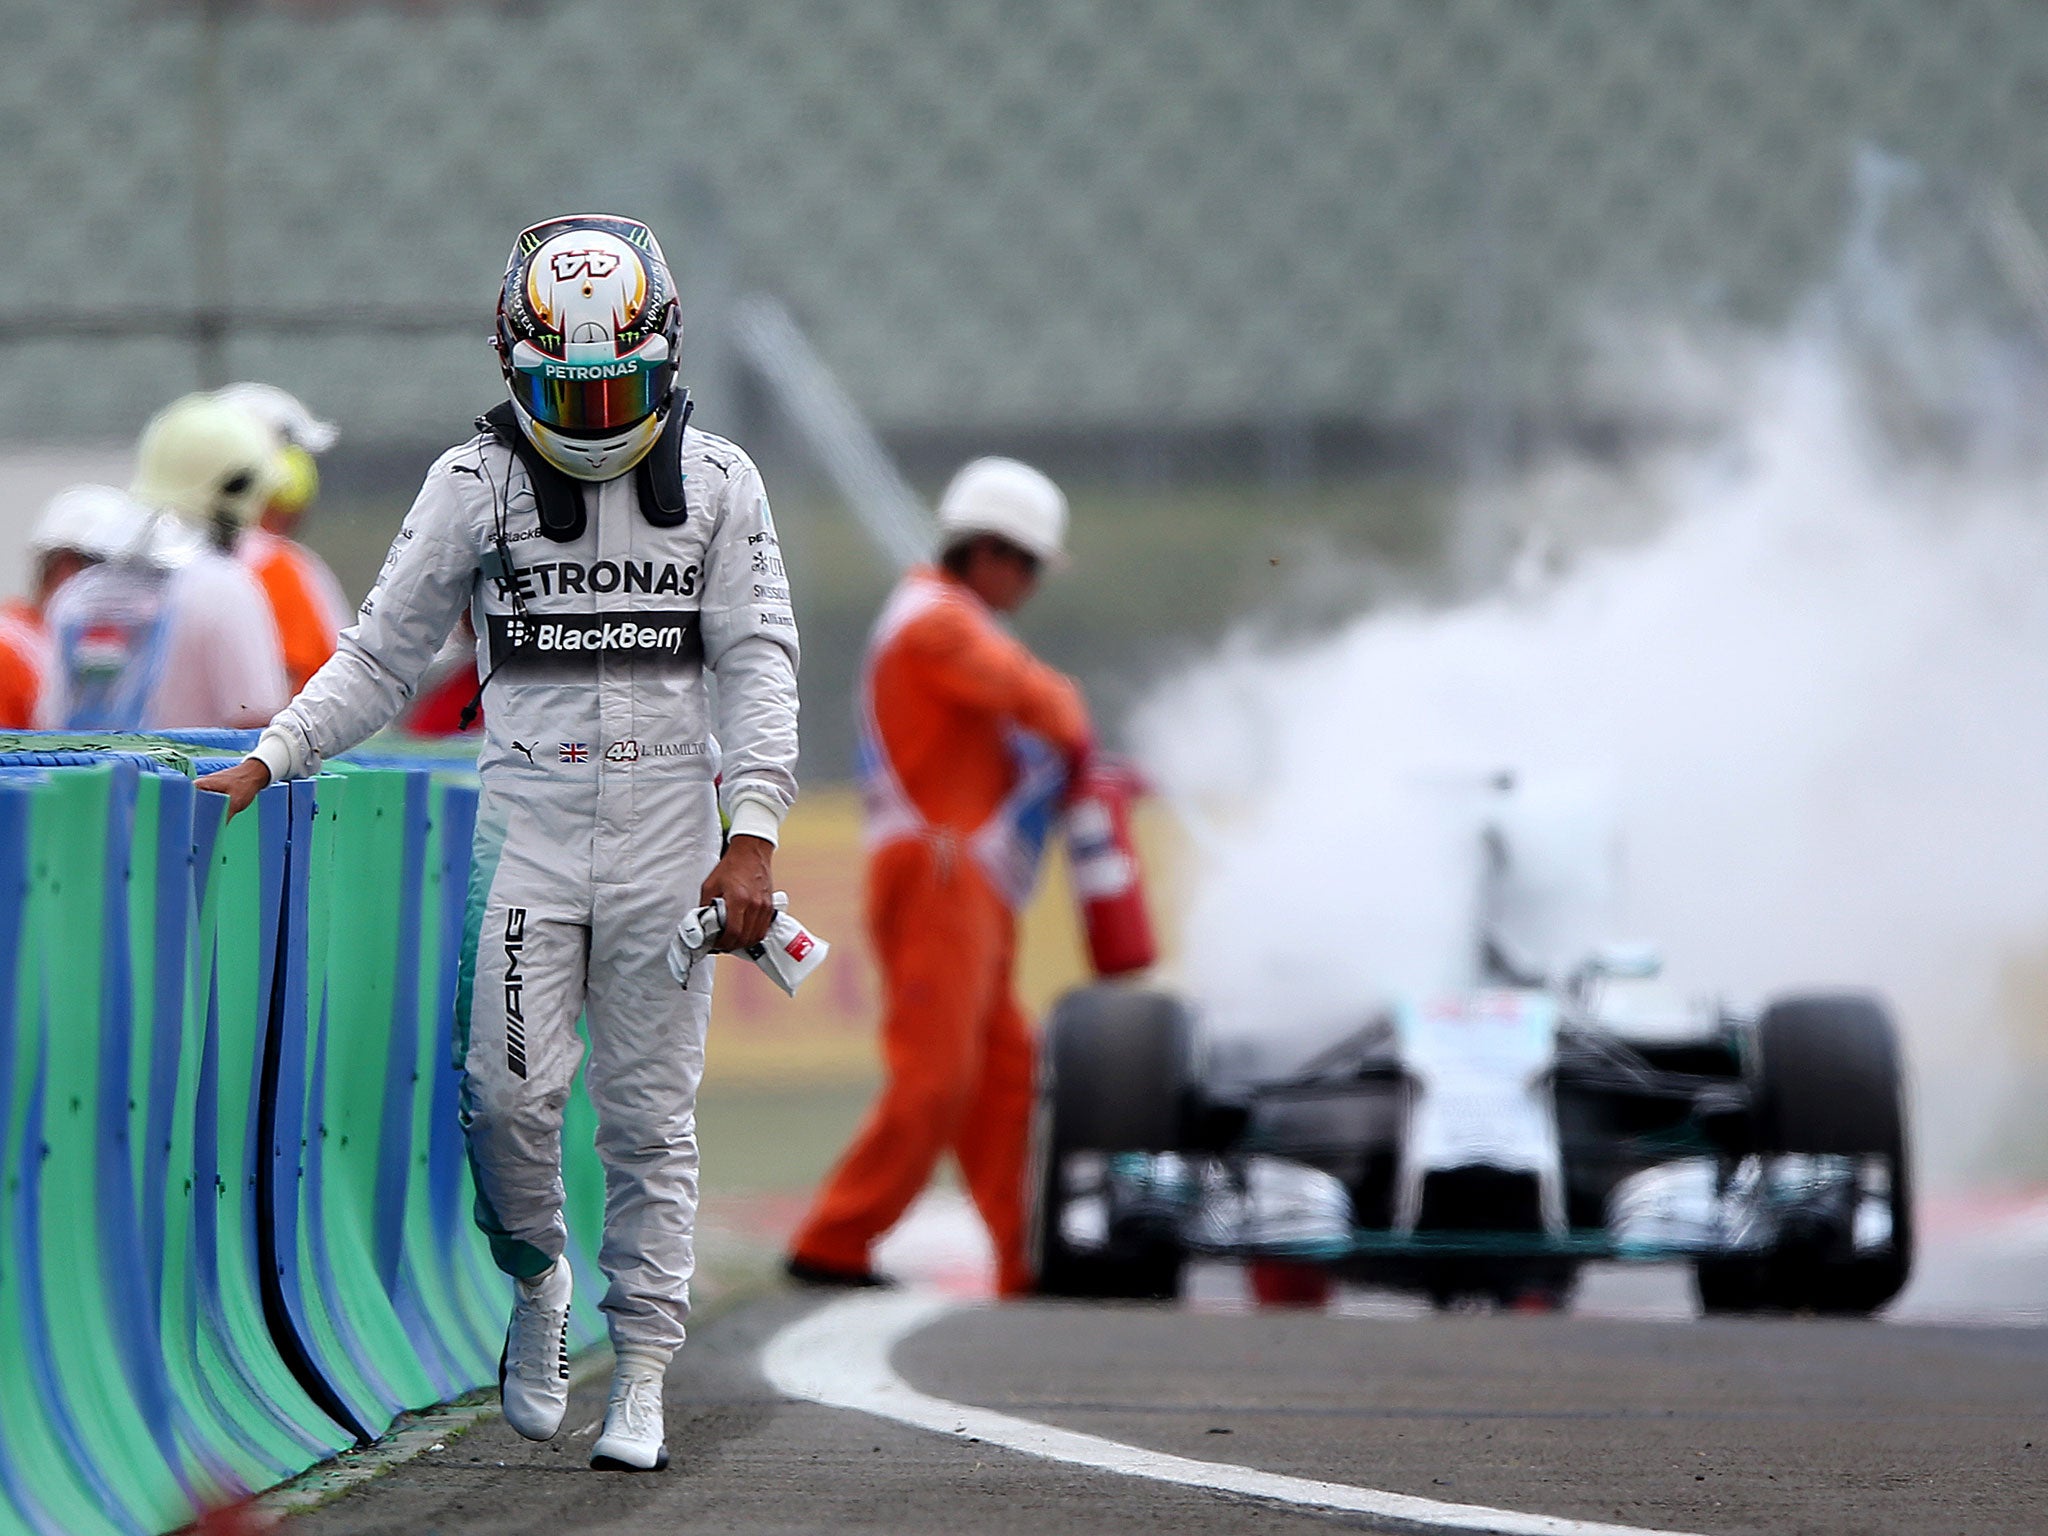 Lewis Hamilton walks back to the pit lane with his Mercedes burning in the background